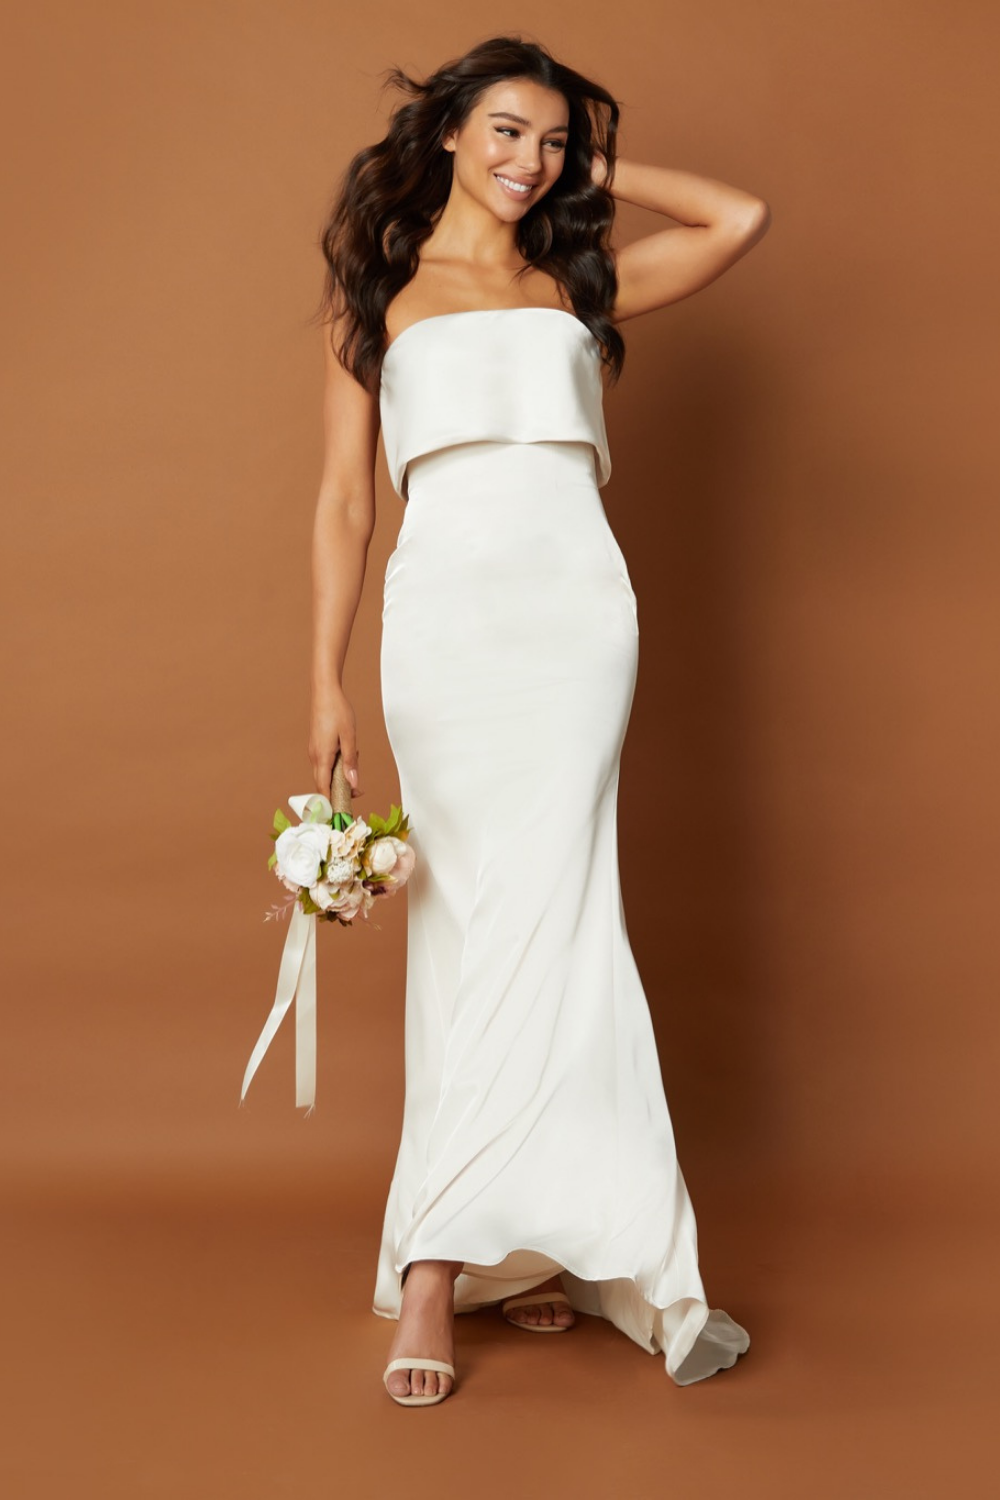 Jetaime Strapless Maxi Dress with Overlay and Button Back Detail, UK 10 / US 6 / EU 38 / Ivory